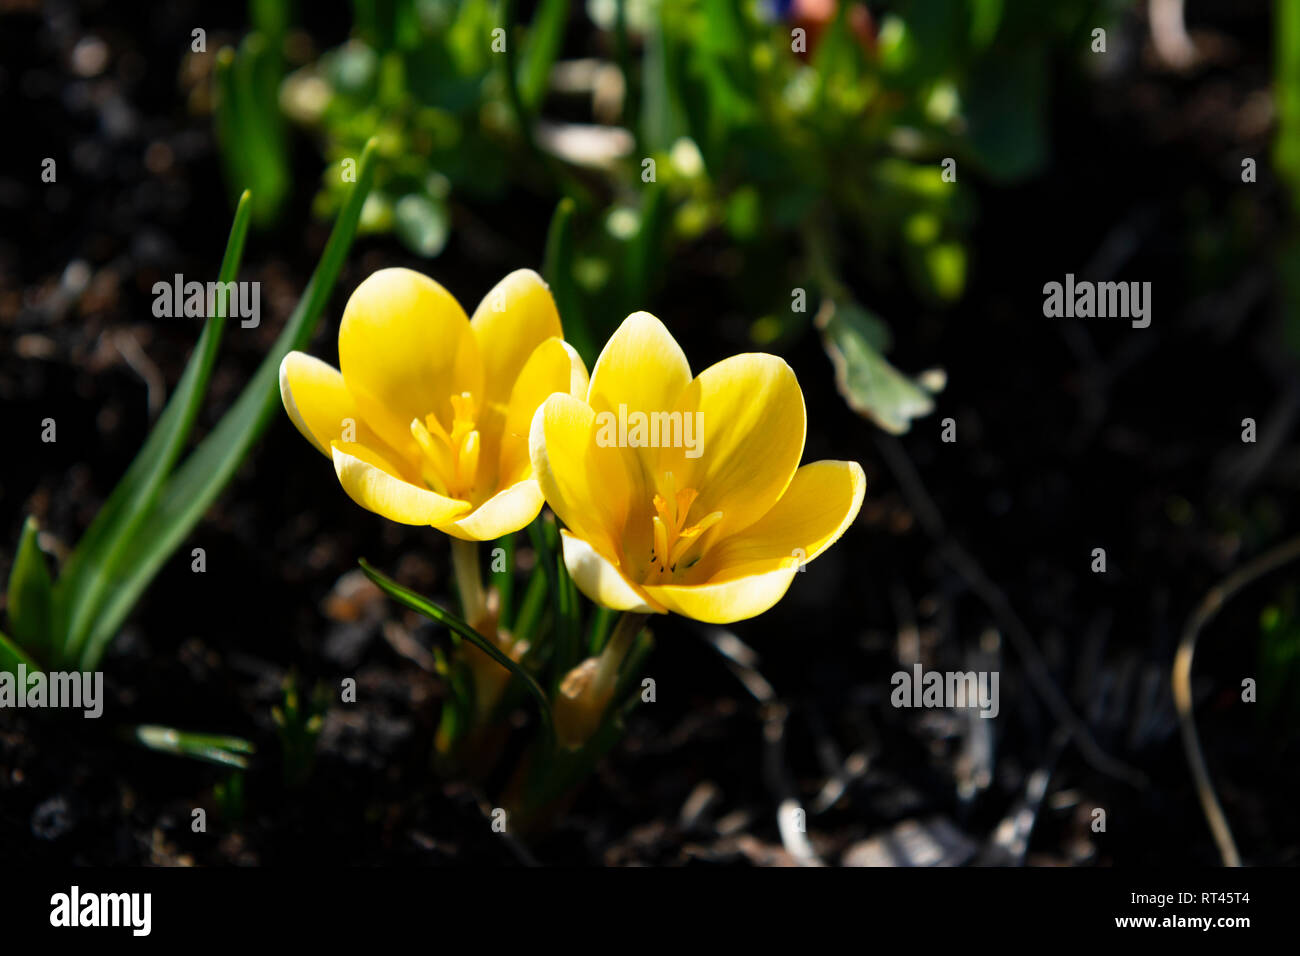 Two small yellow crocuses caught in sunlight in a shaded flower bed Stock Photo